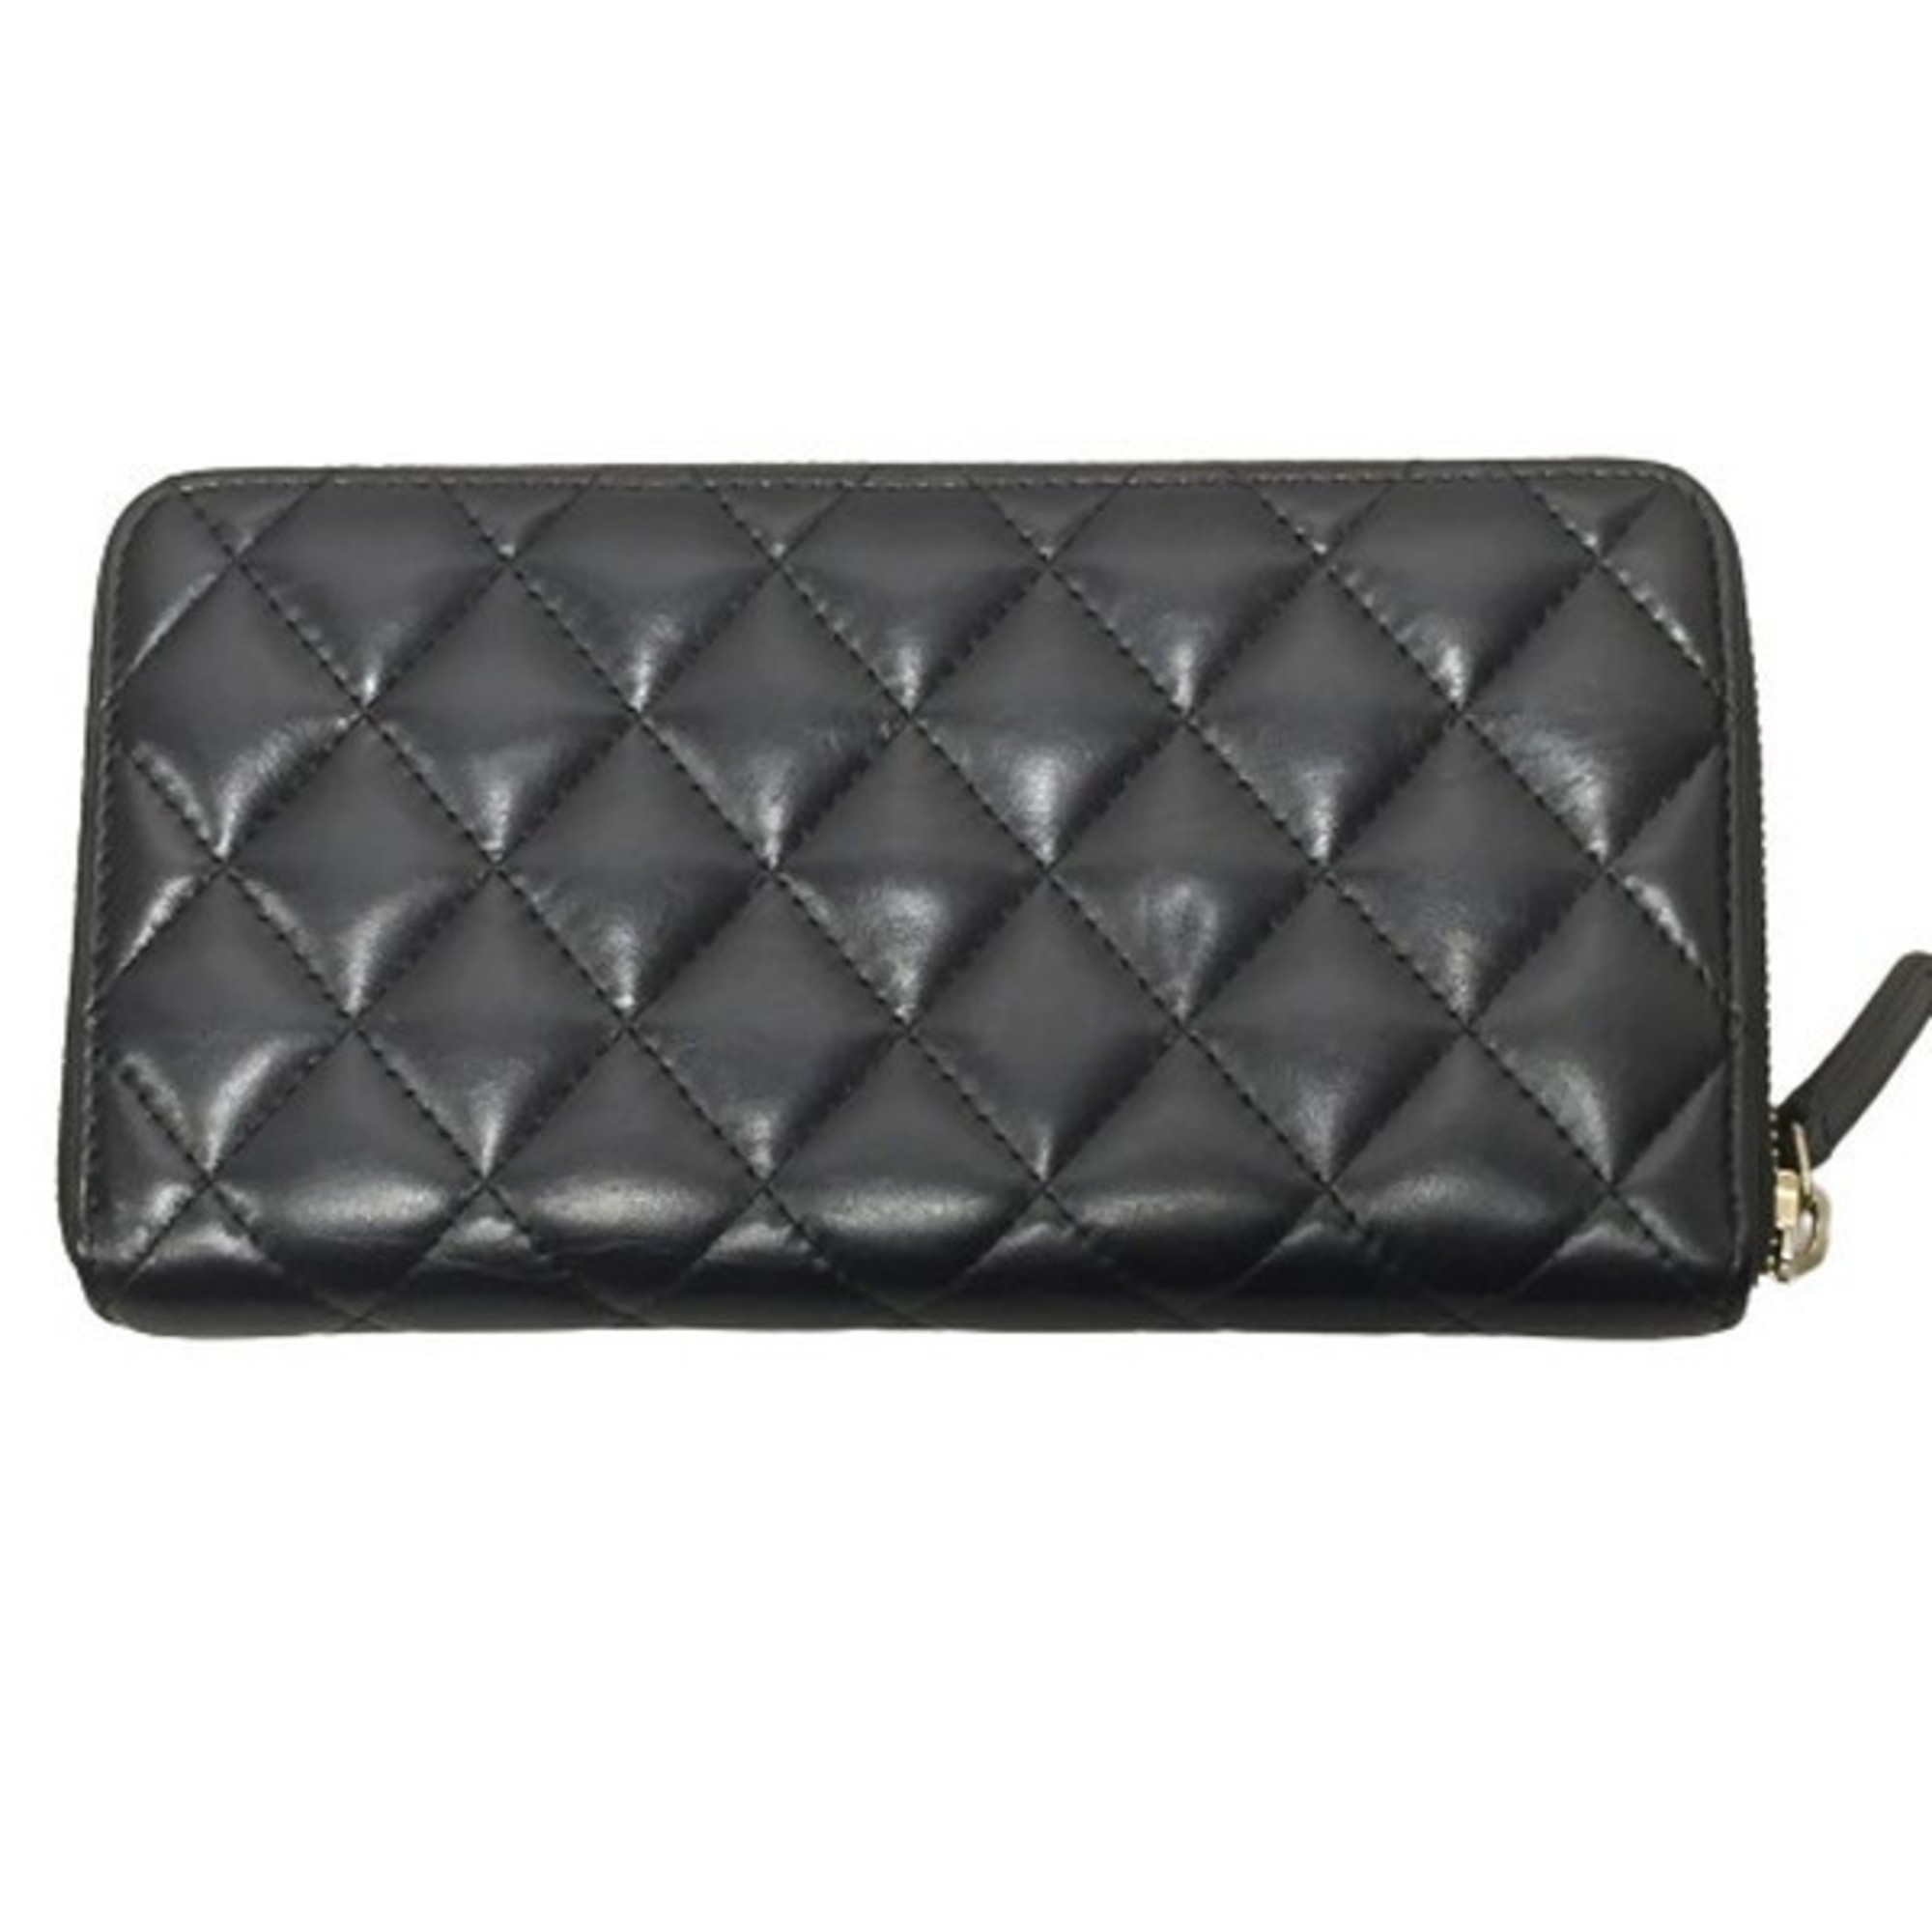 CHANEL Matelasse Lambskin A80830 Round Embroidery Zip Wallet Women's Charm ITHB96SFVEIS RM2574D